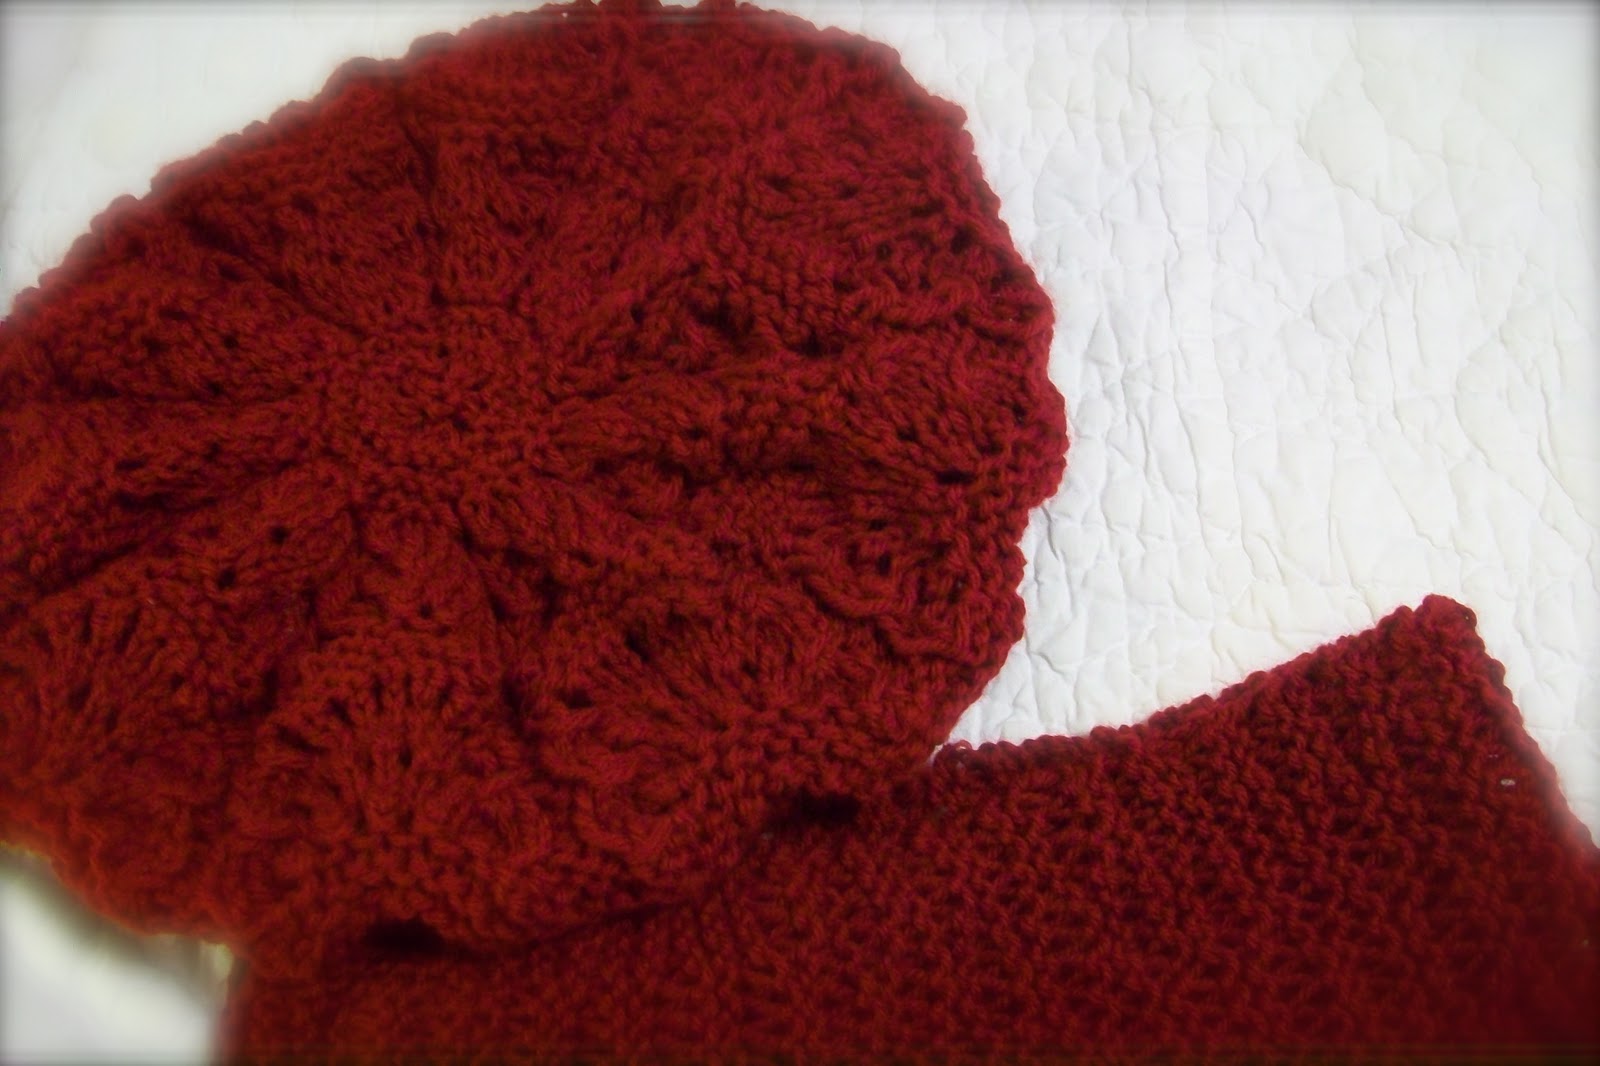 Rose's Yarn: A Greenery Beret and a Ruche Beret